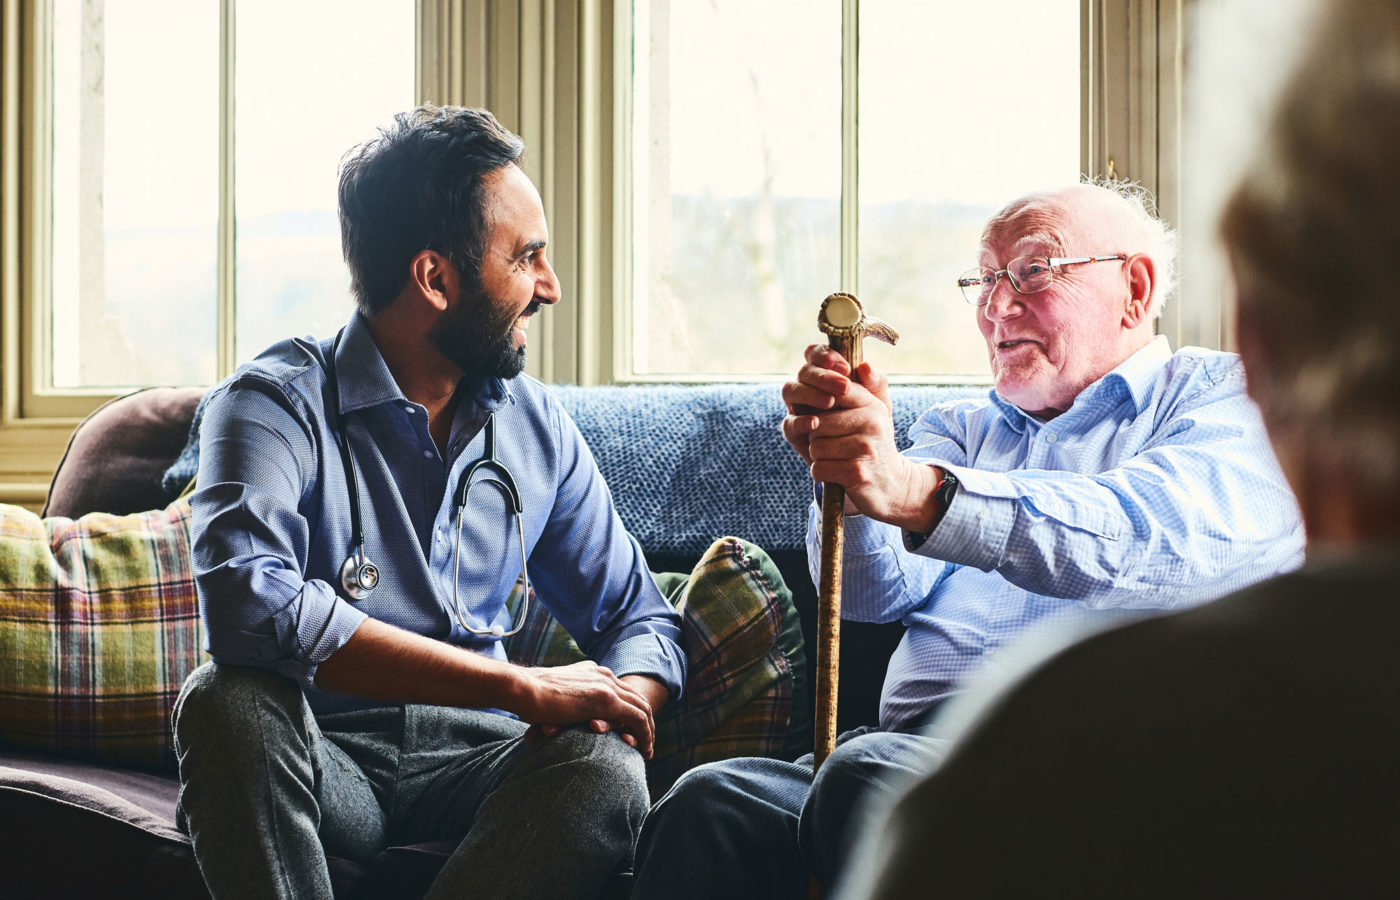 Elderly man and adult male physician talk over custodial care issues